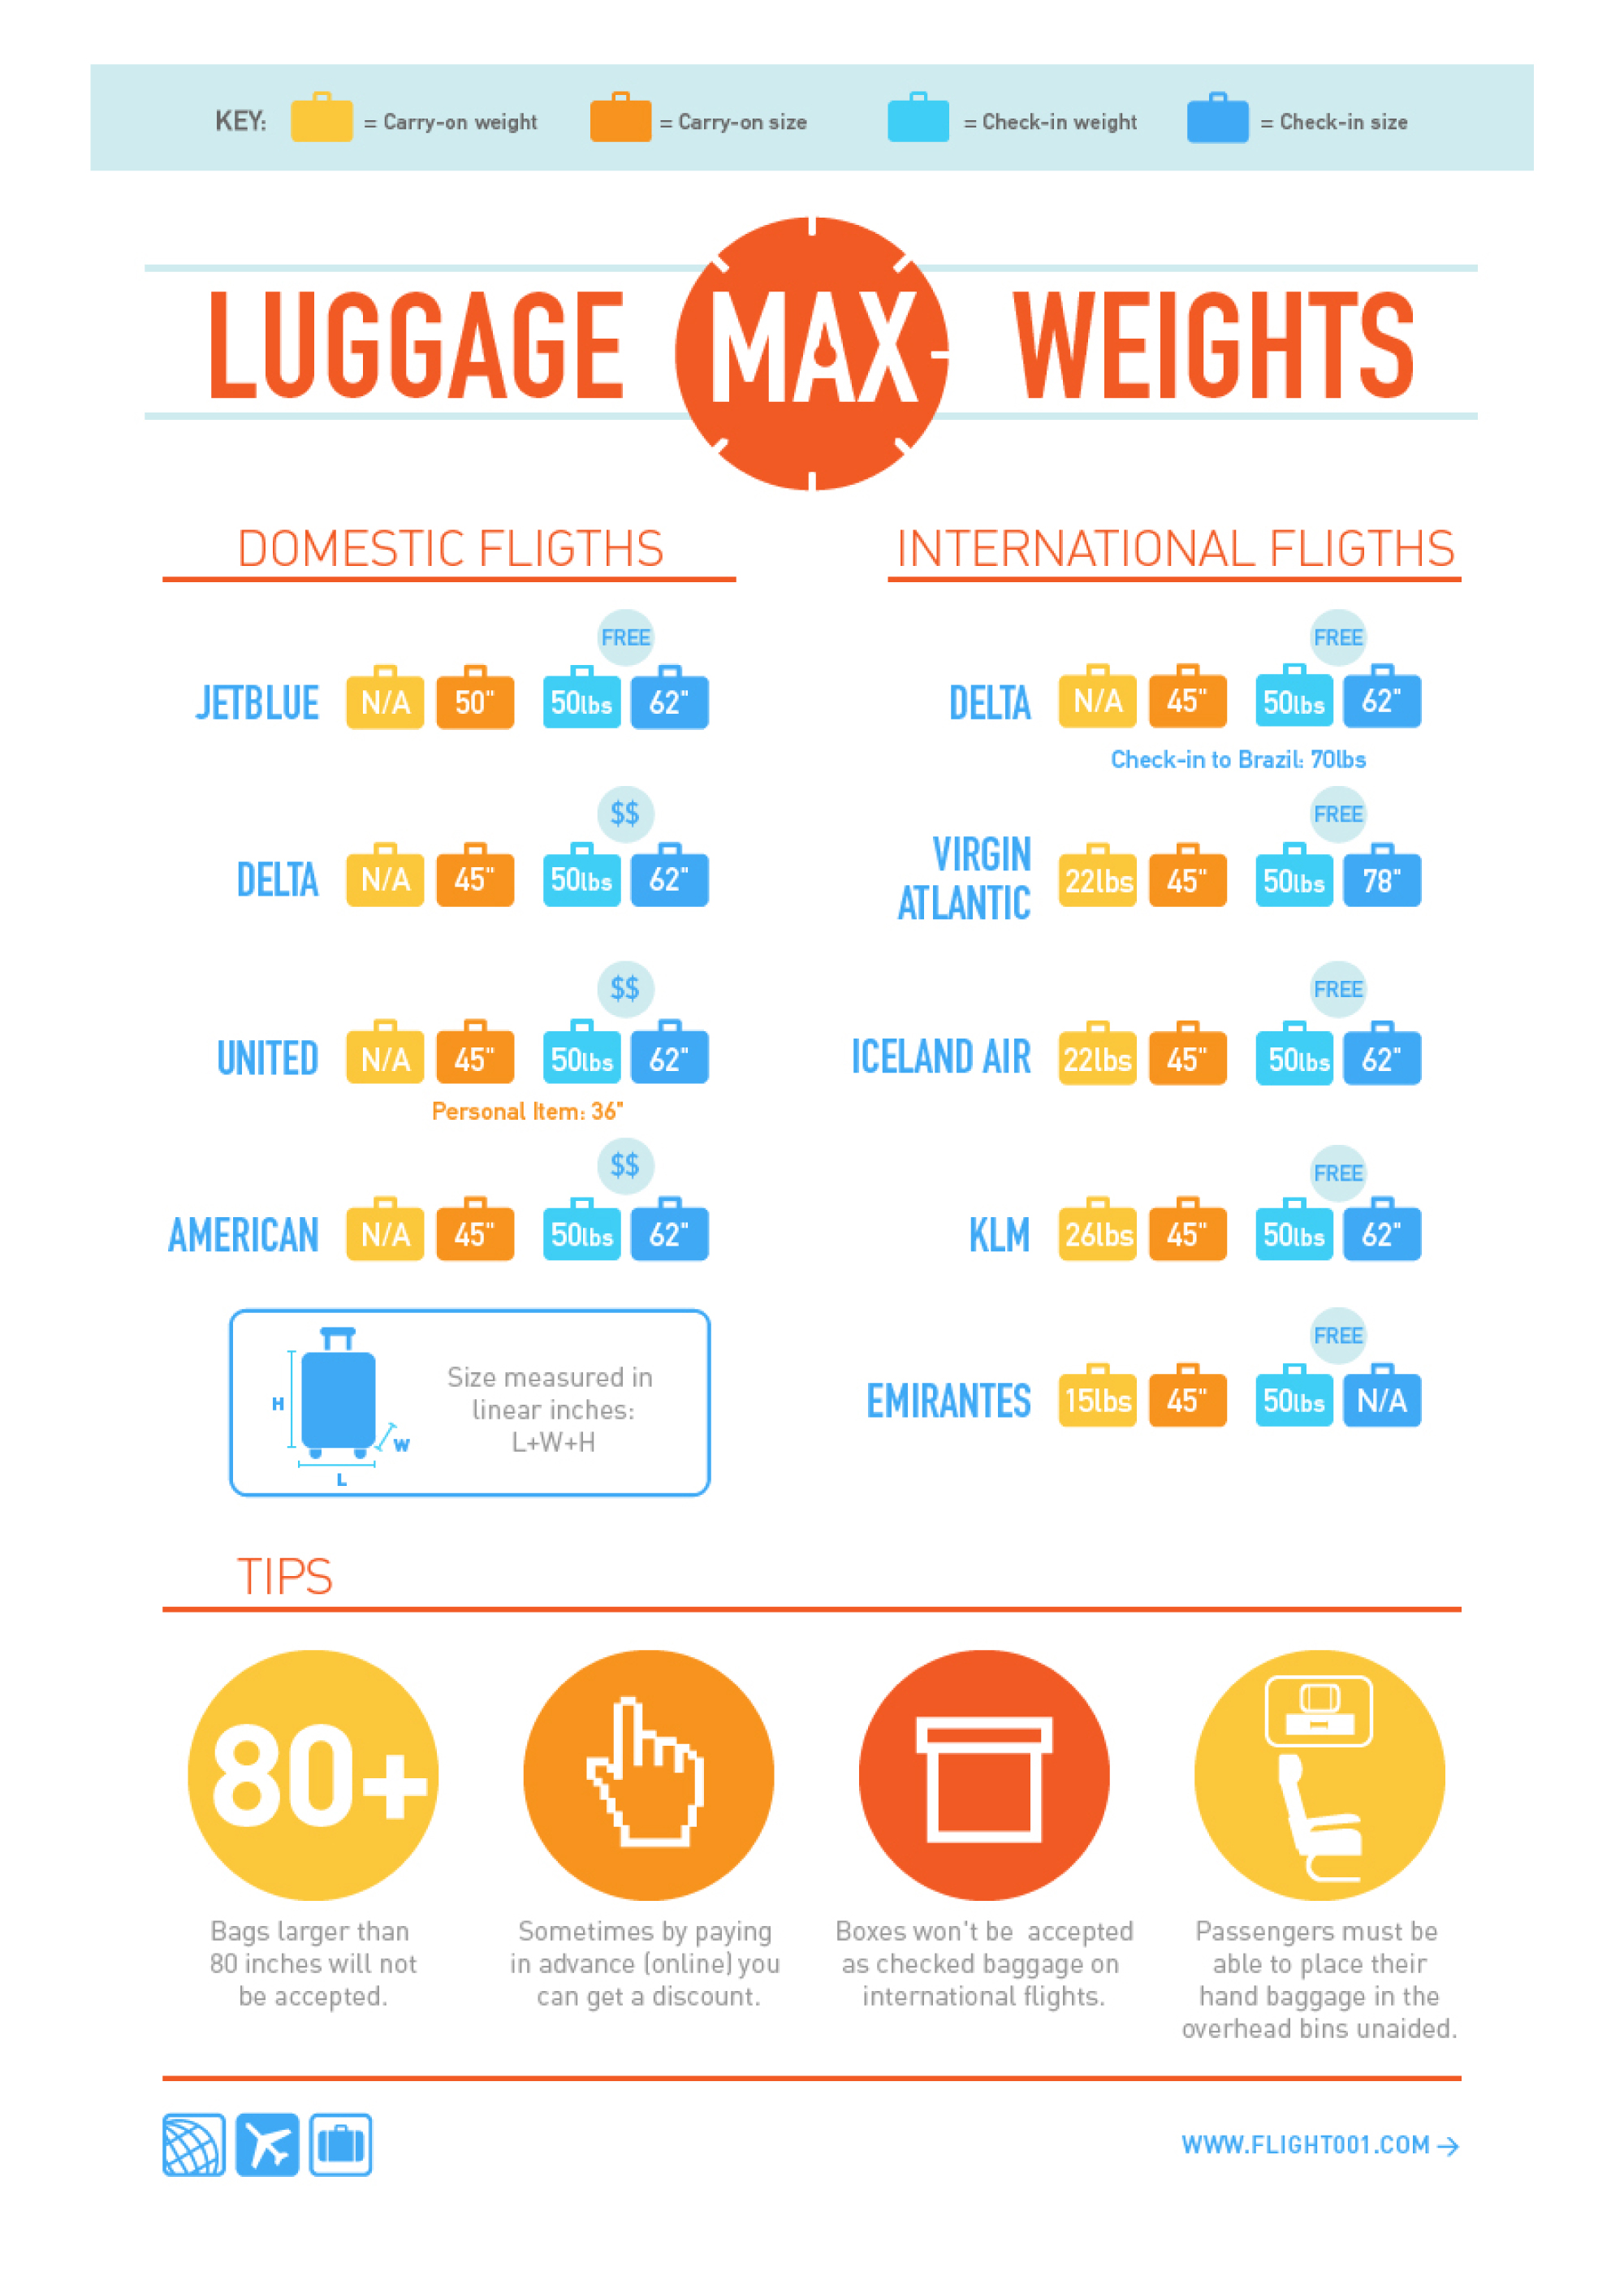 carry-on luggage restrictions